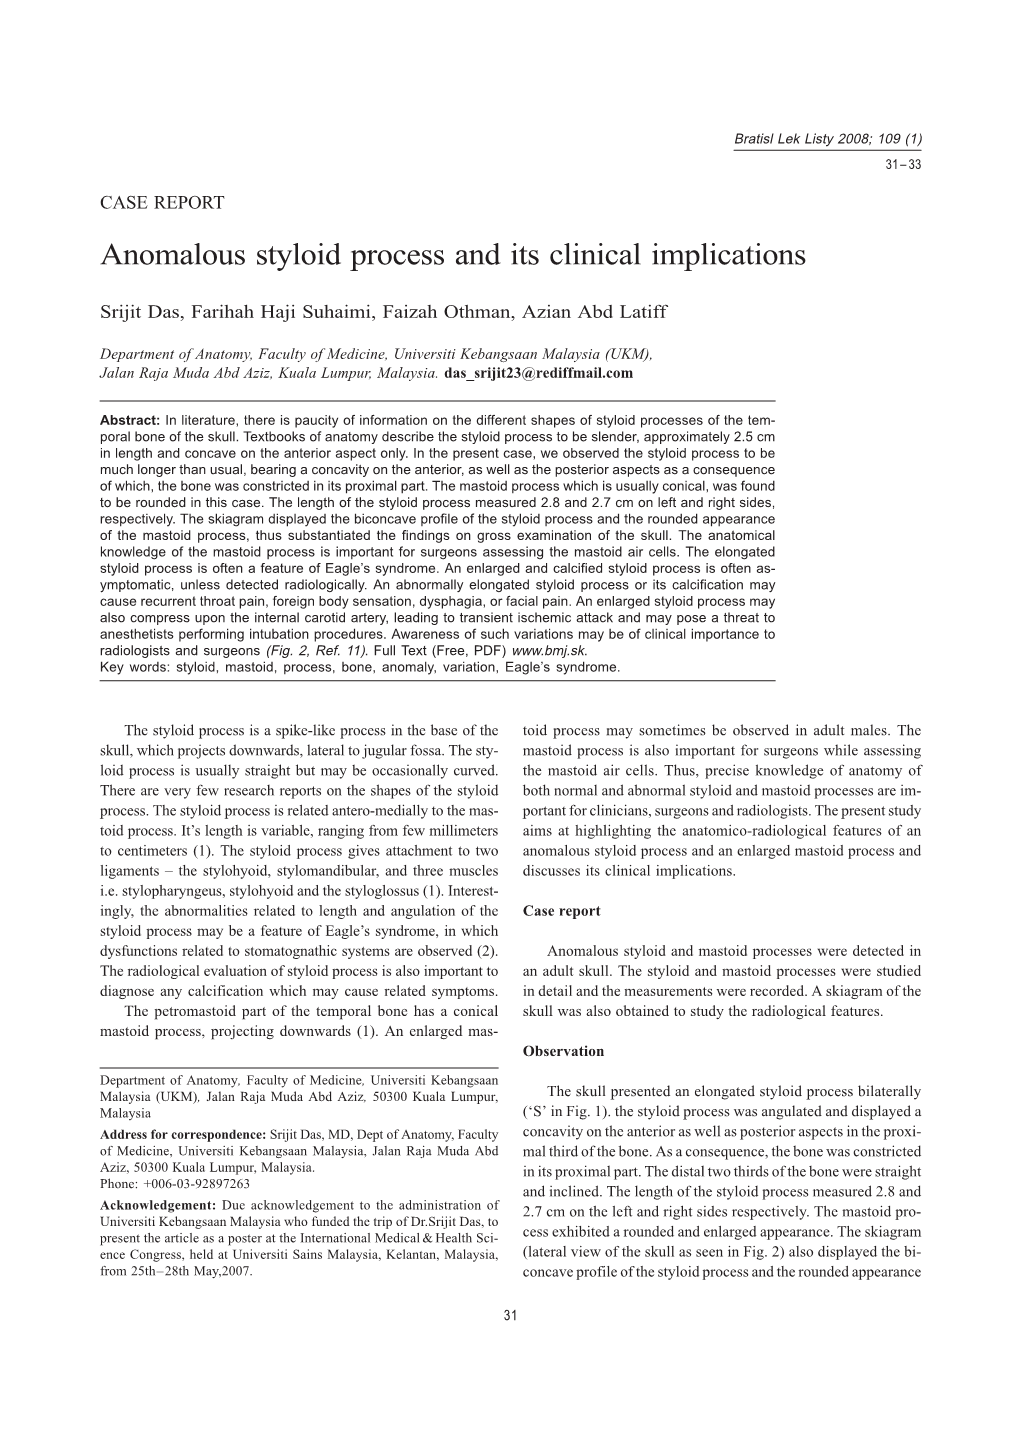 Anomalous Styloid Process and Its Clinical Implications